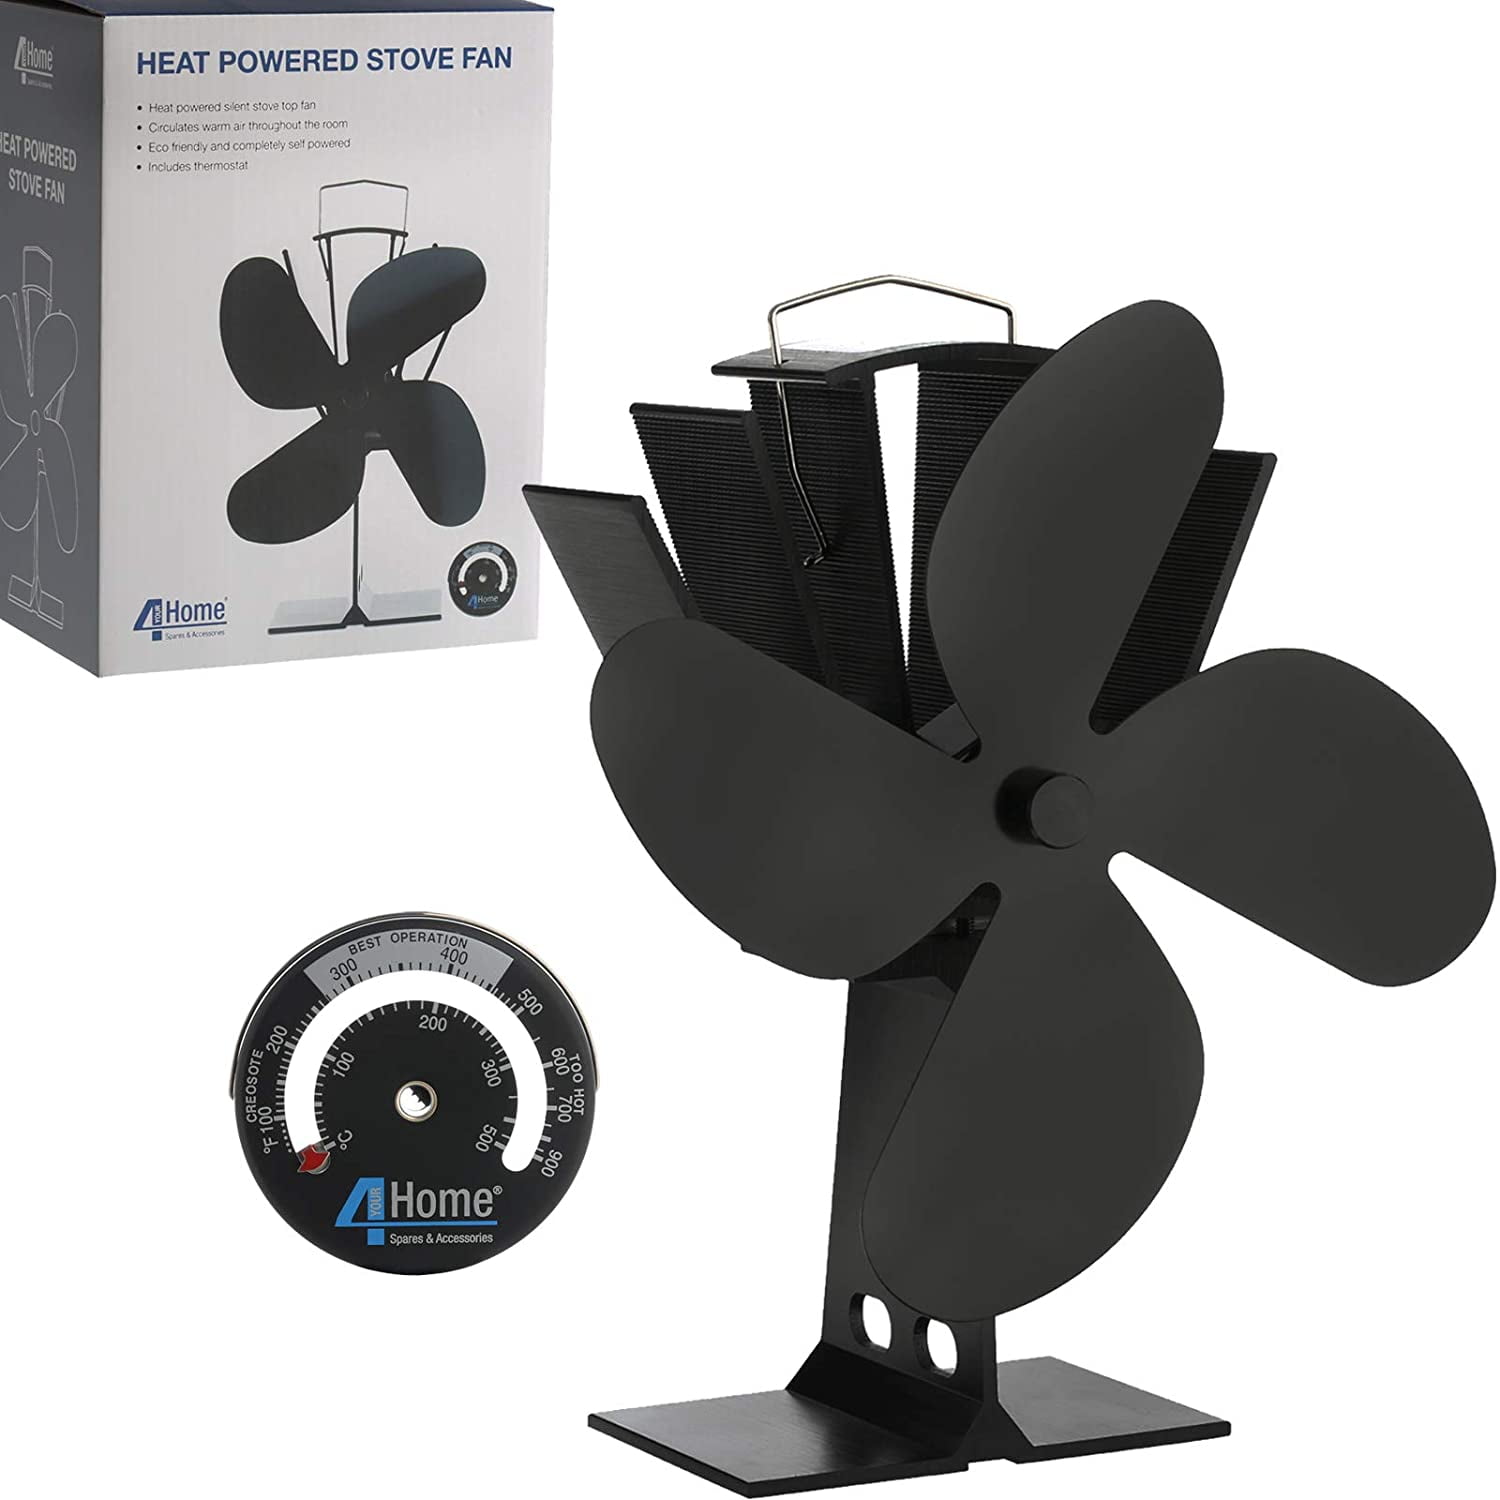 Specially Designed for Small Space Log/Wood Burner-Making room warm quickly 6 Blades Heat Powered Stove Fan increases 90% more warm air than 3 blades 